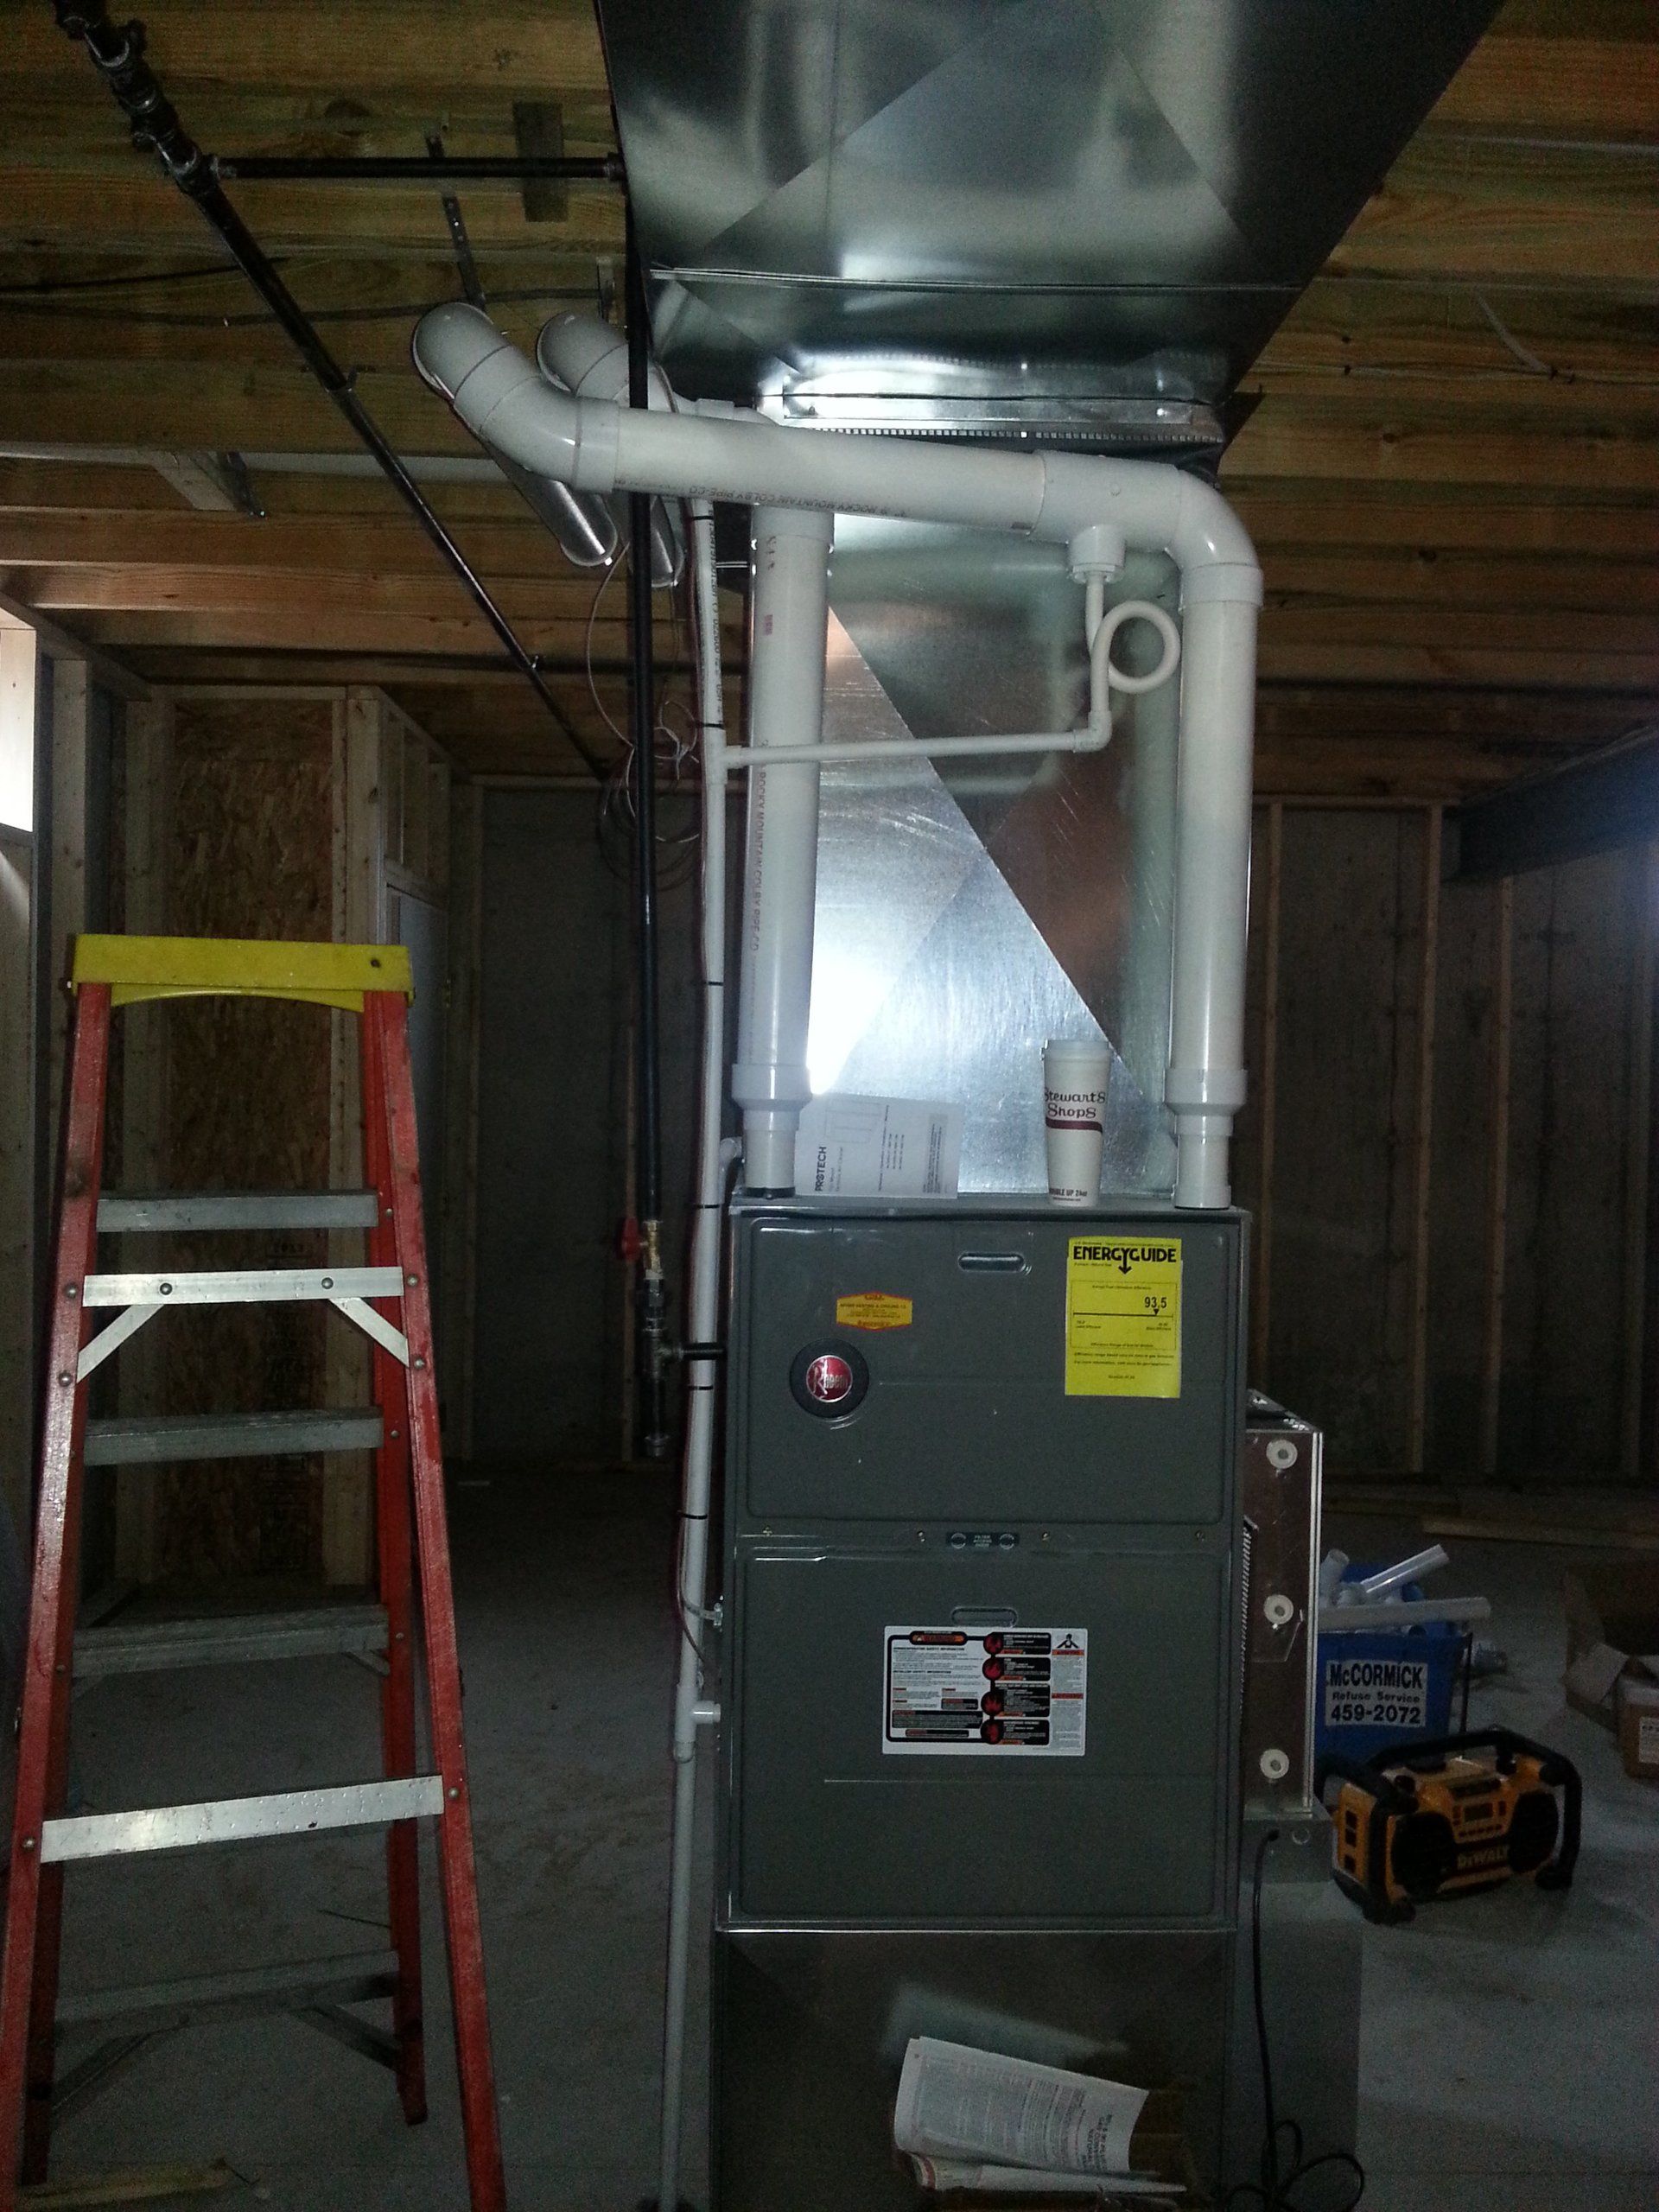 repair  duct work connected to hot air furnace by Adams Heating & Cooling